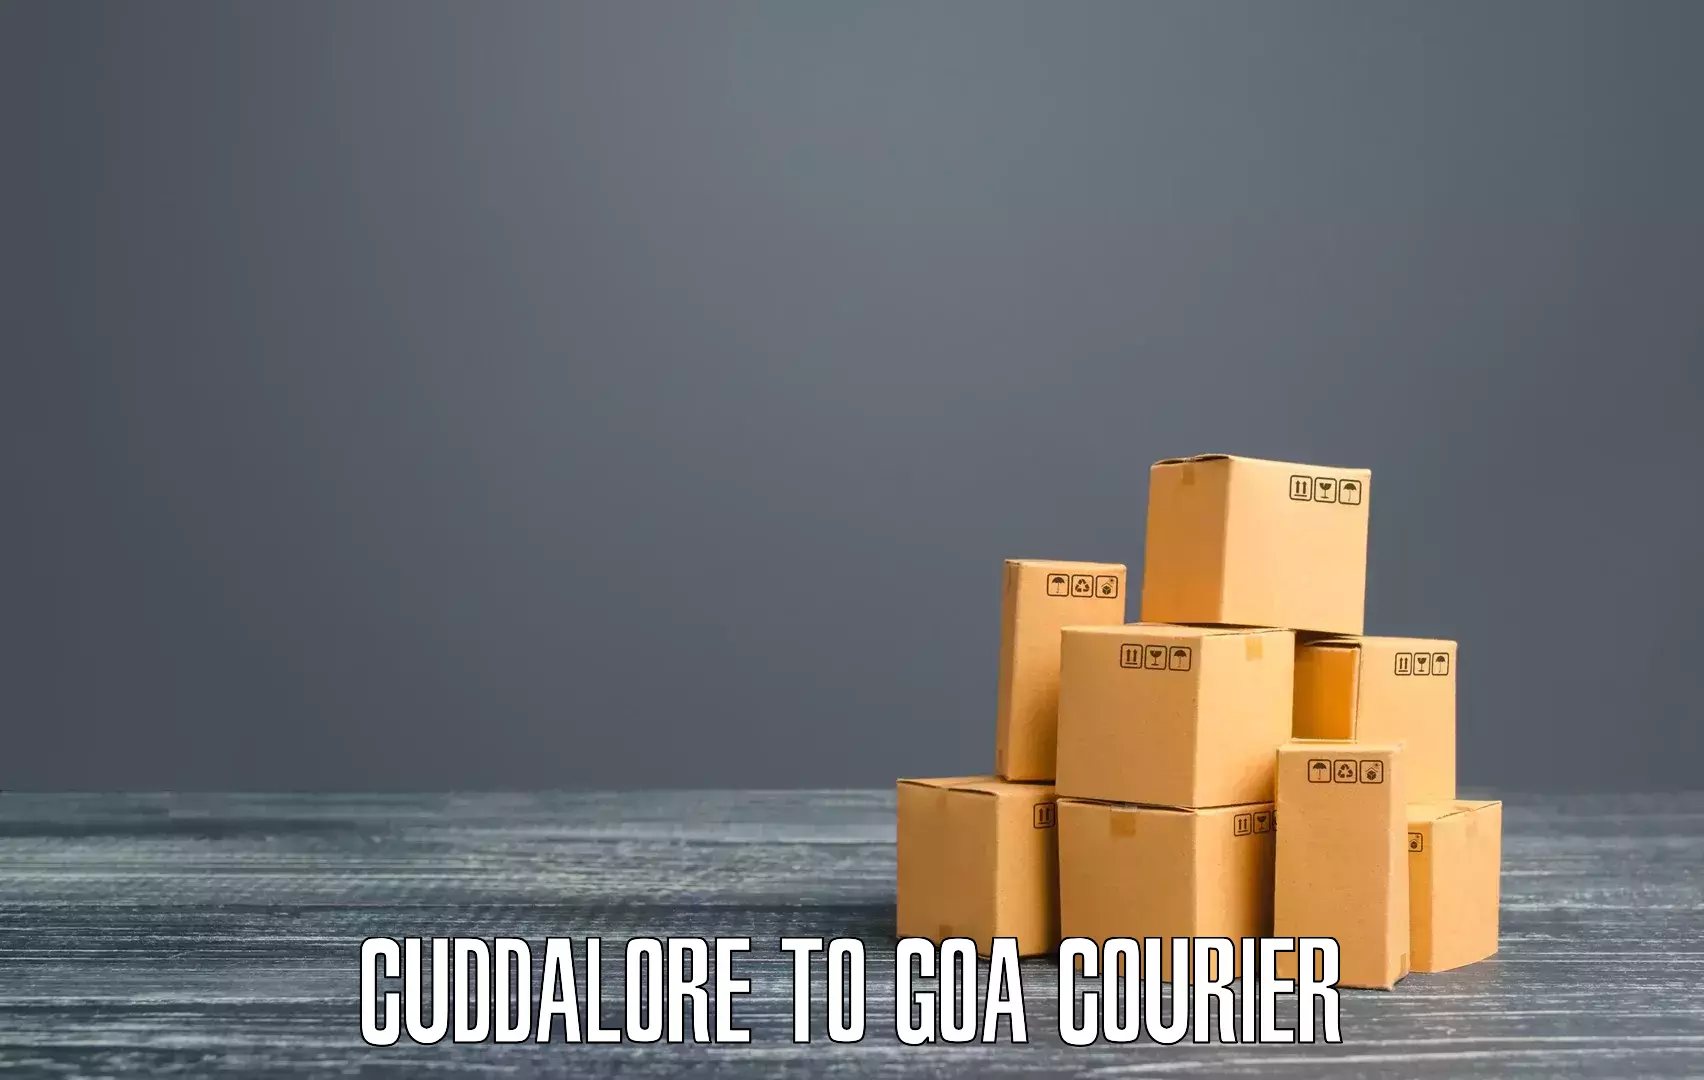 Medical delivery services Cuddalore to Goa